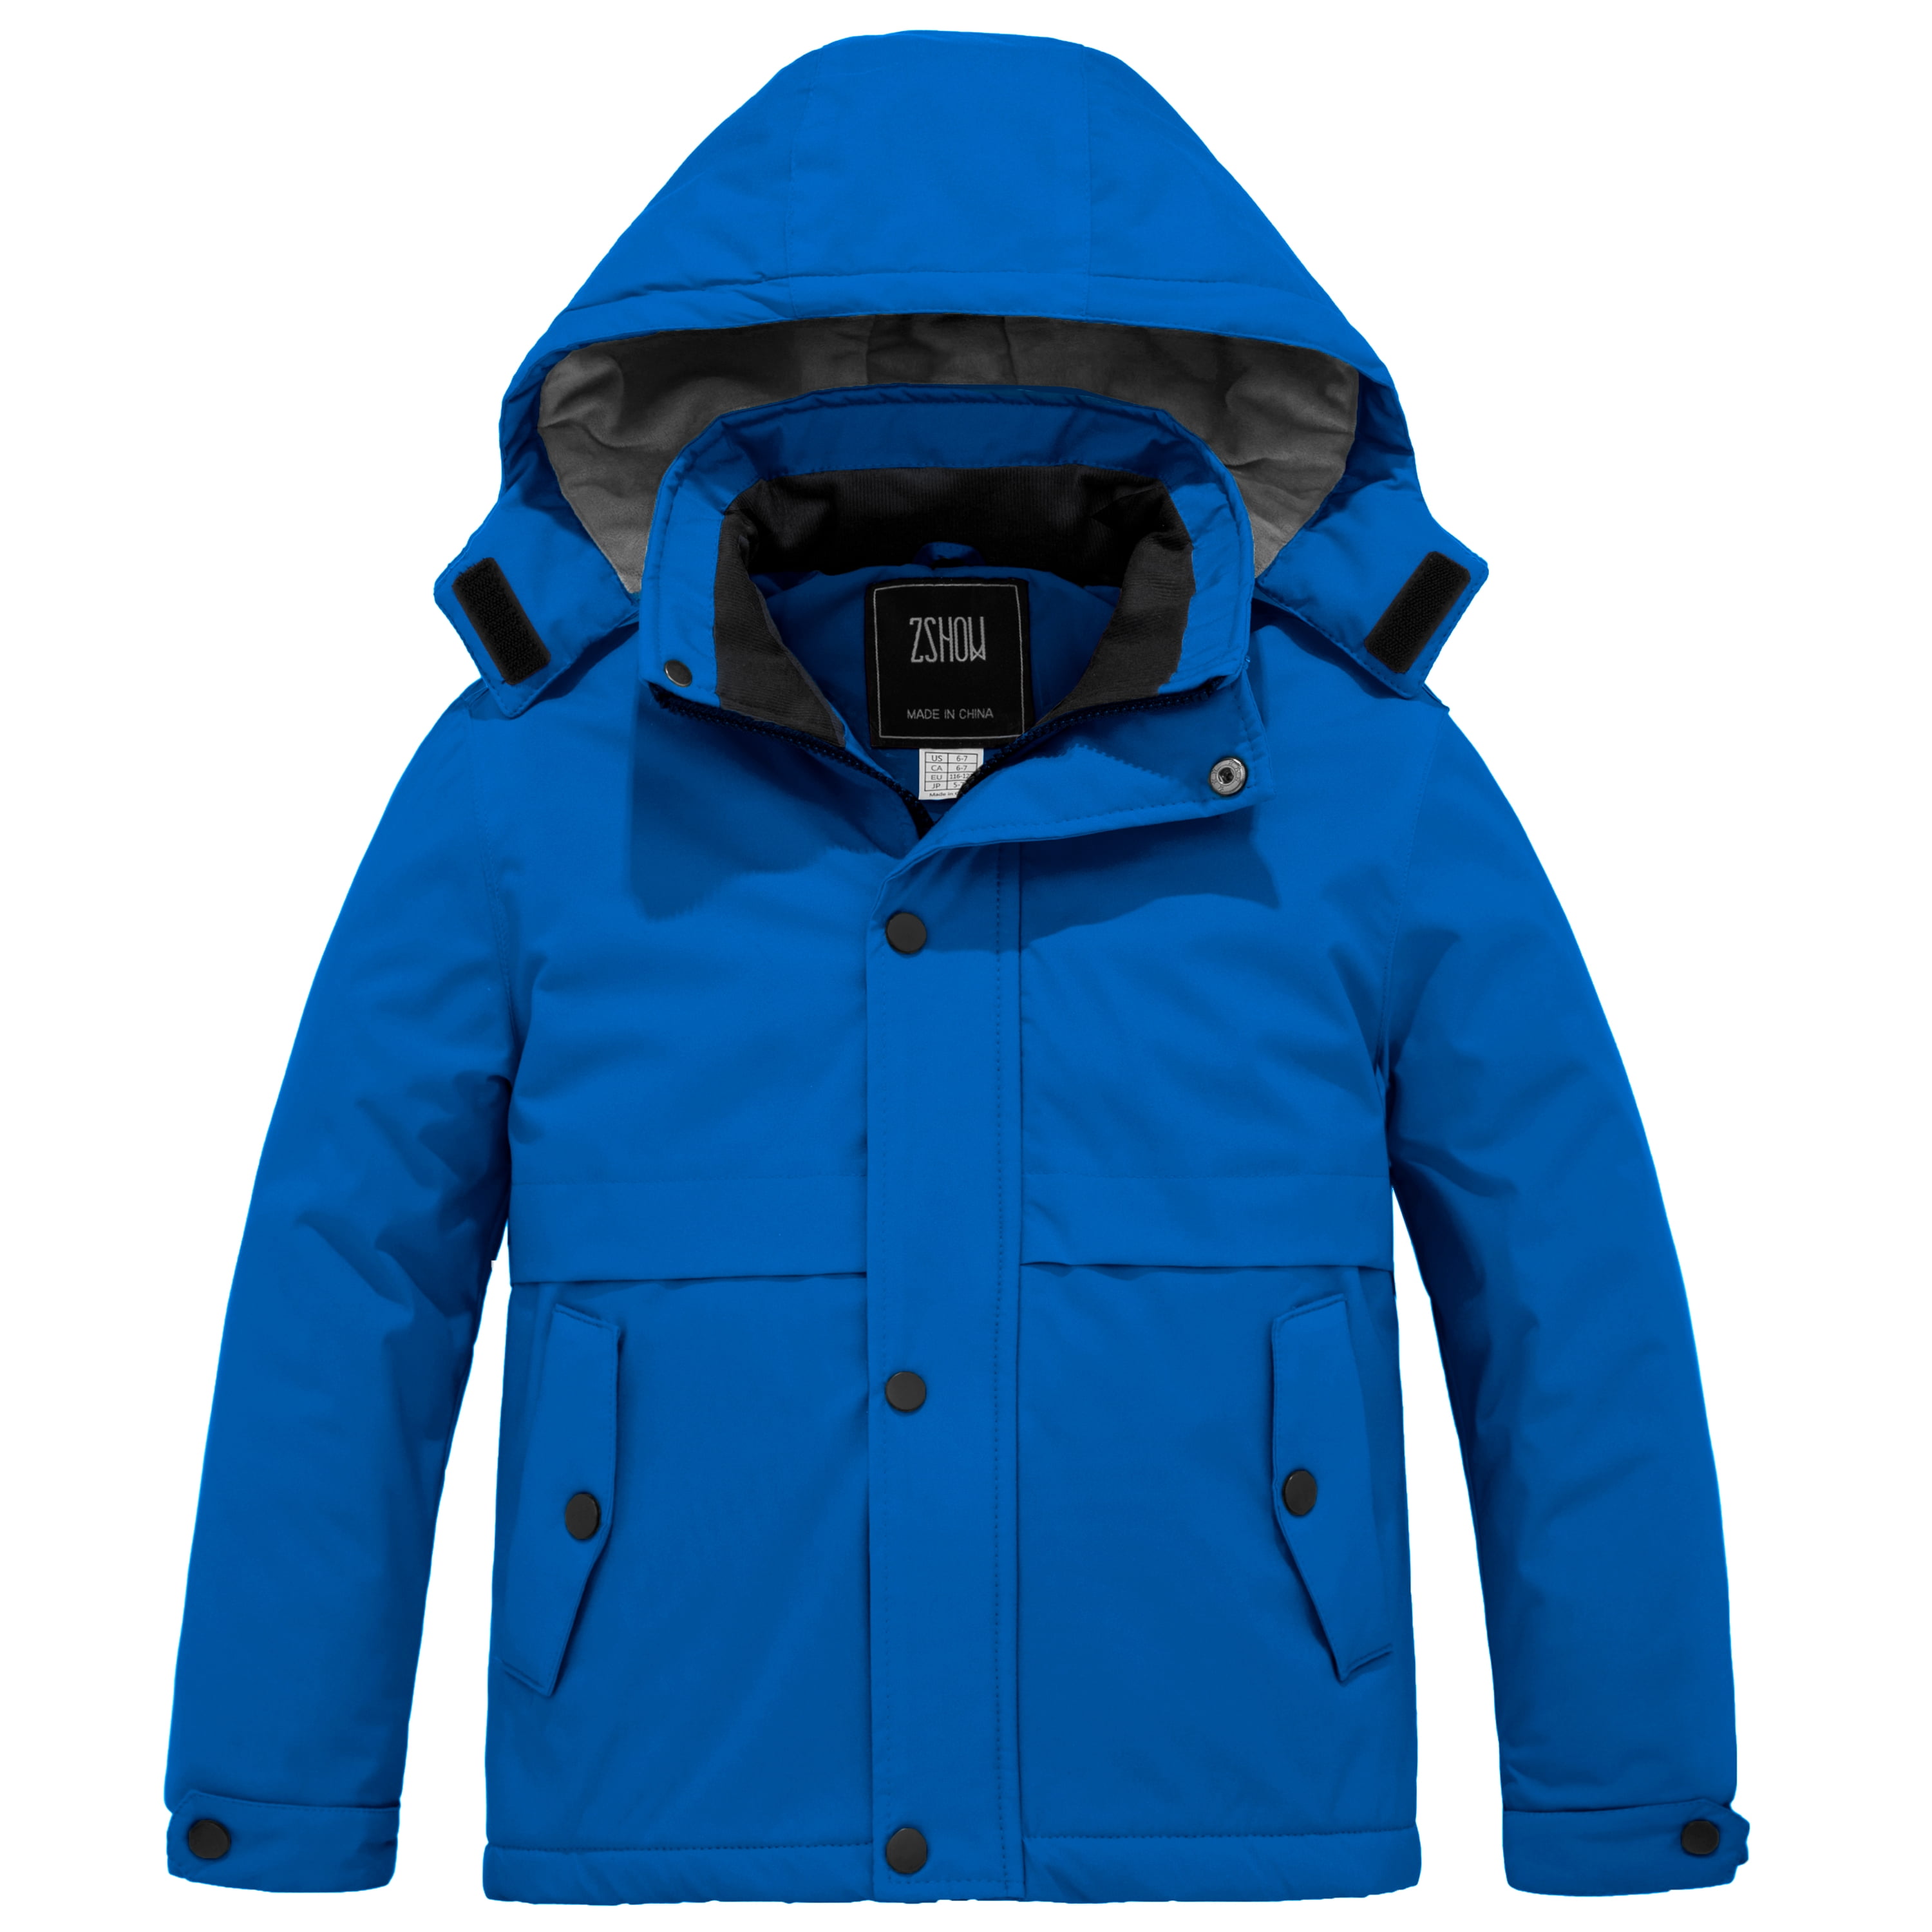 SODIAL Hot Saling Children Boys Jackets Coats Kids Active clothing Double-deck Waterproof Windproof Boys outwears Spring/Autumn Boy Jacket R Thick Blue 9-10T=140CM 